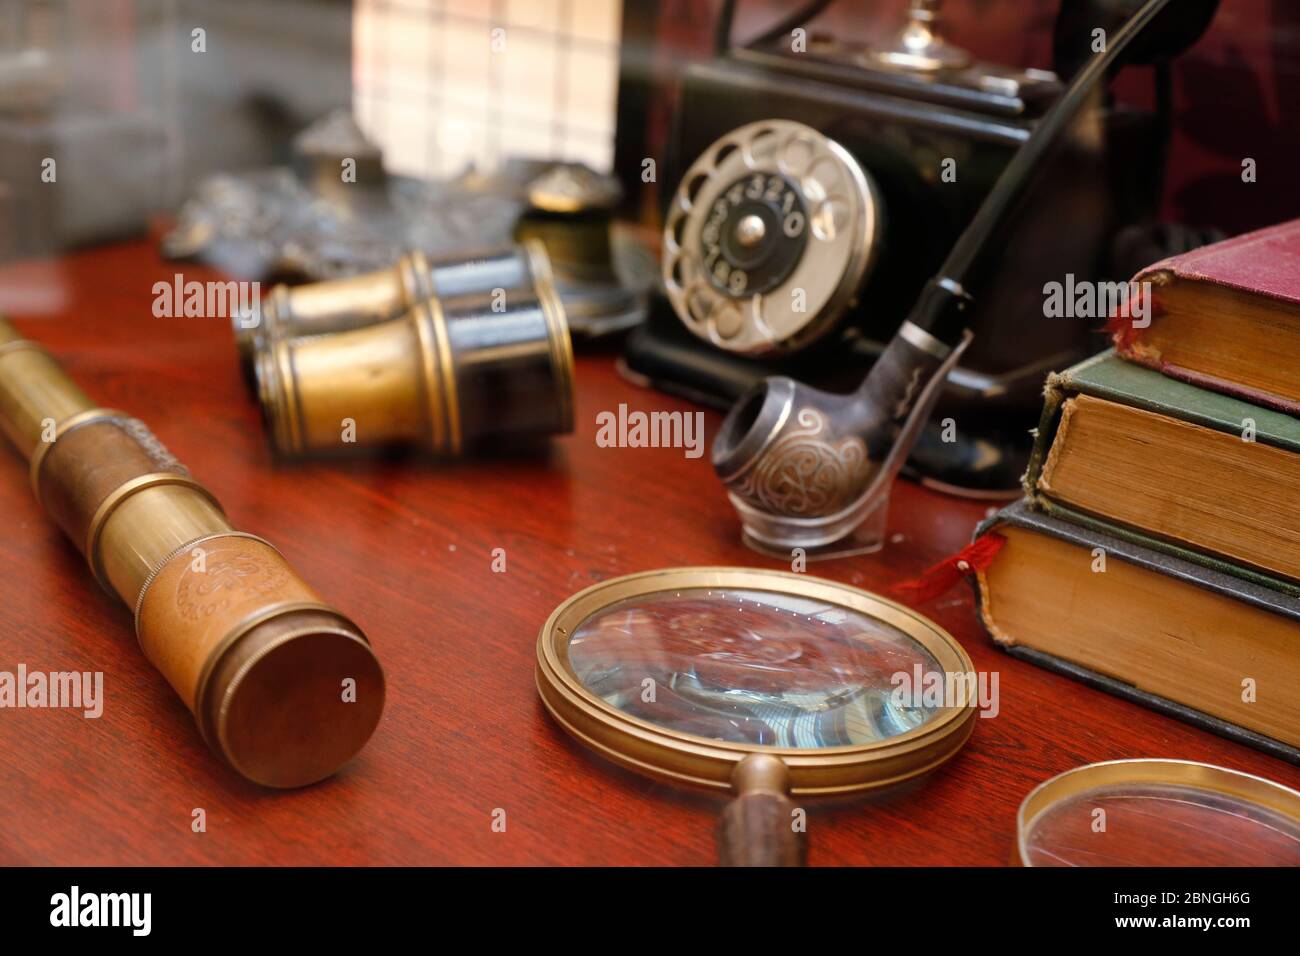 vintage items close up Stock Photo